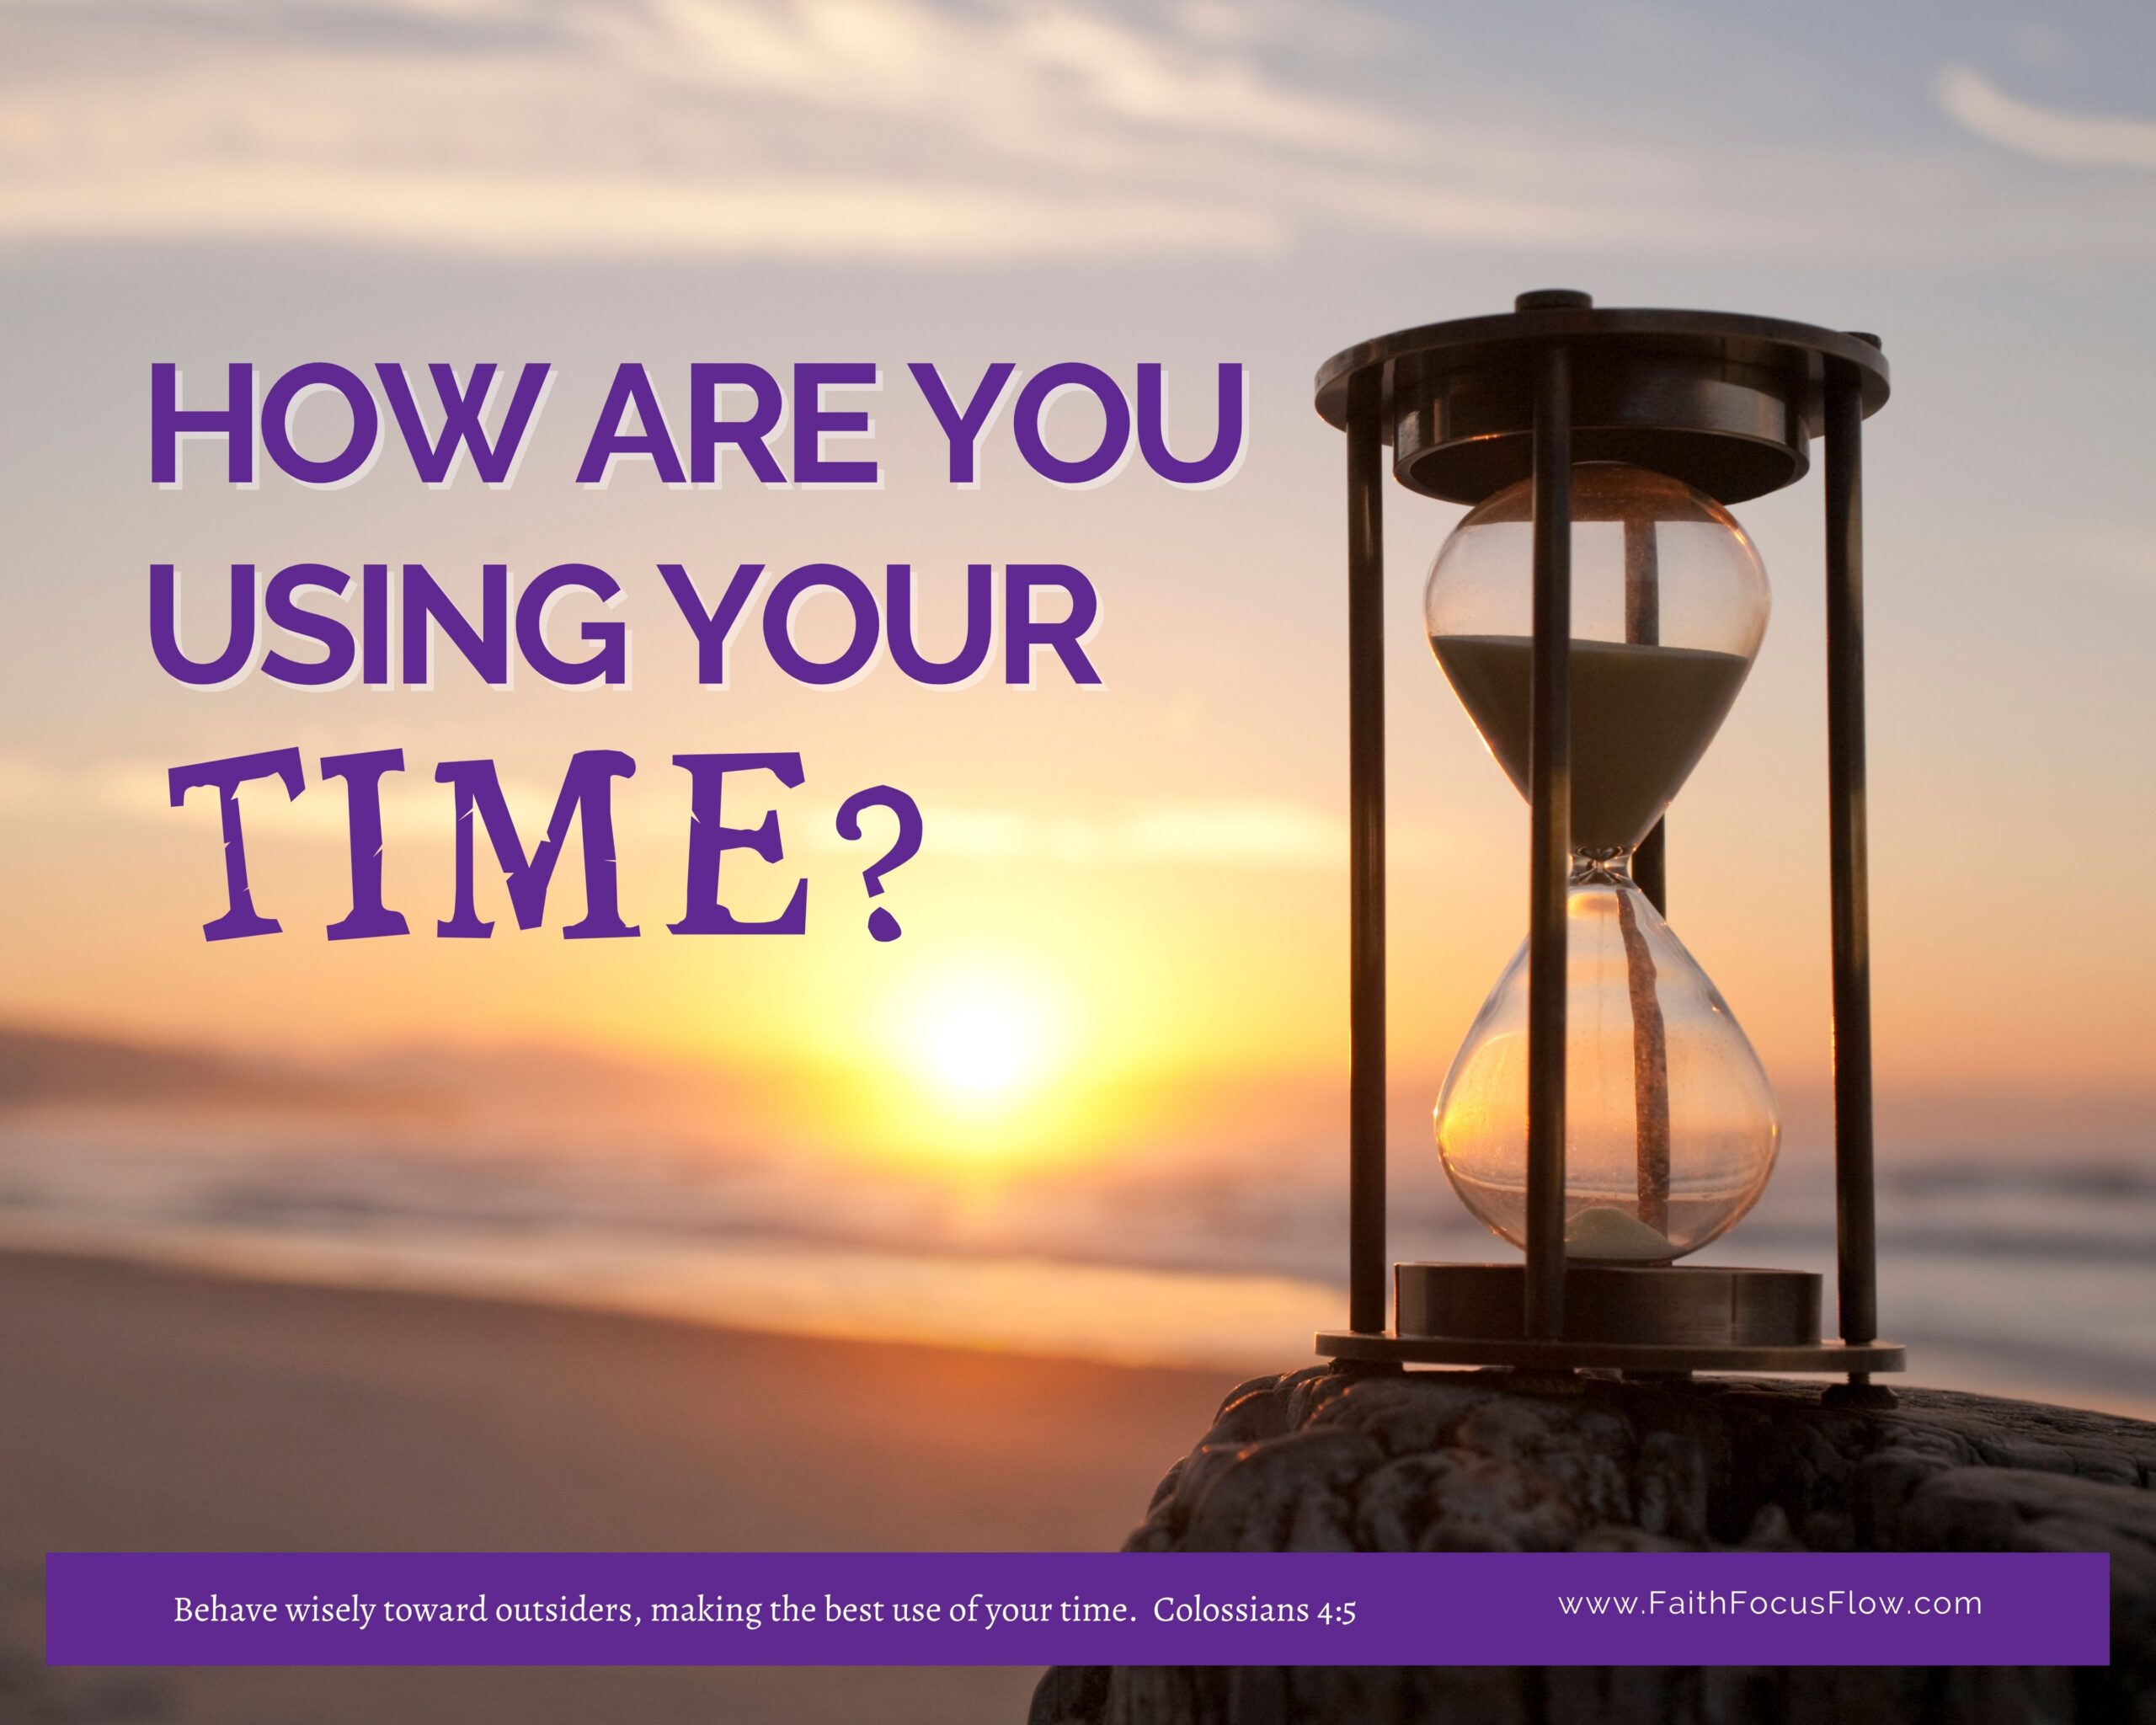 How are you using your time? | FaithFocusFlow®